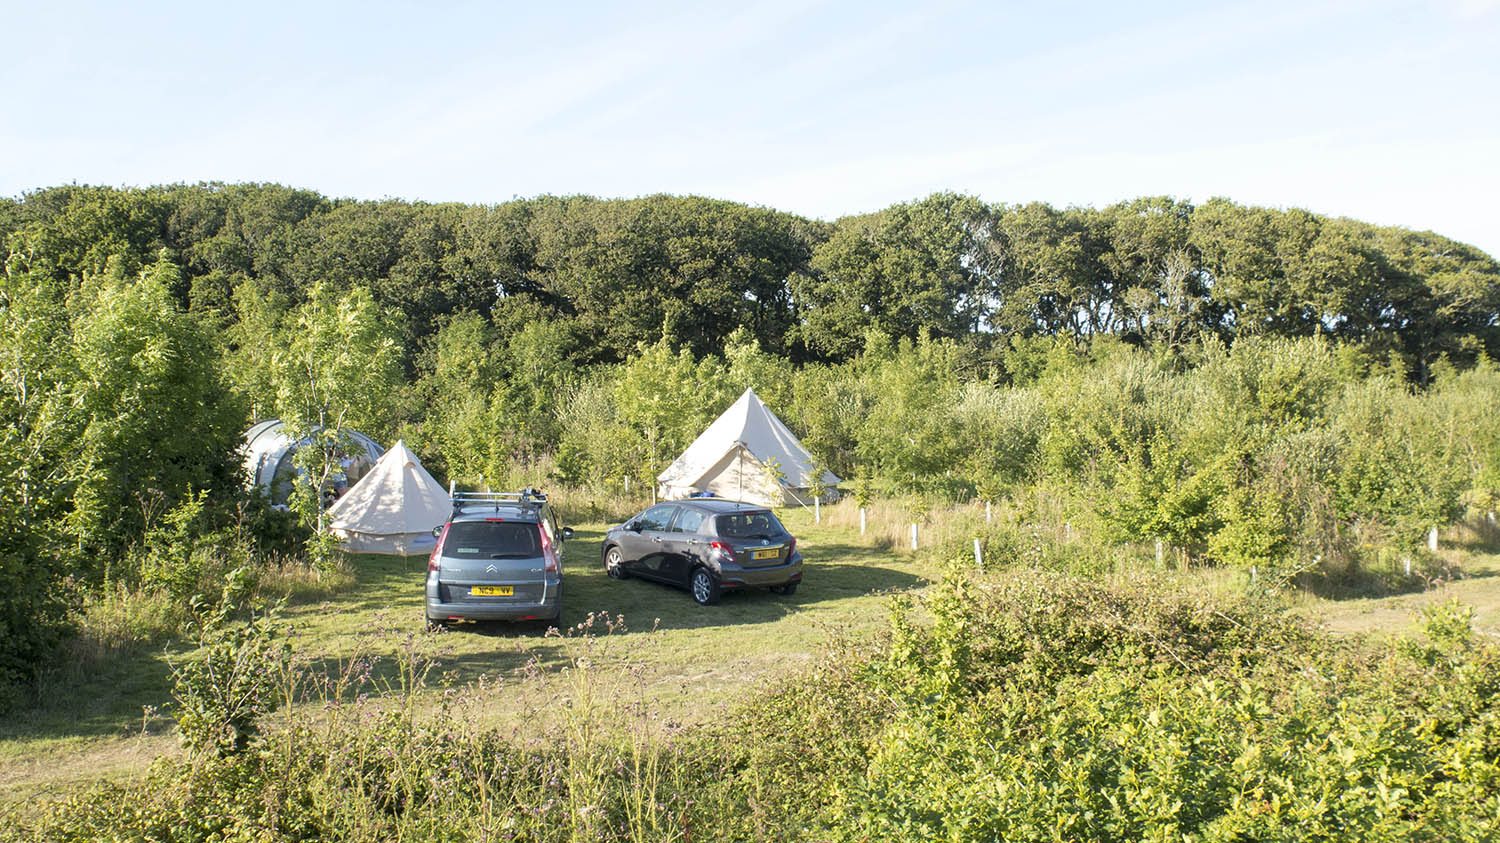 Camp Wight near Yarmouth on the Isle of Wight offers glamping and hammock camping options